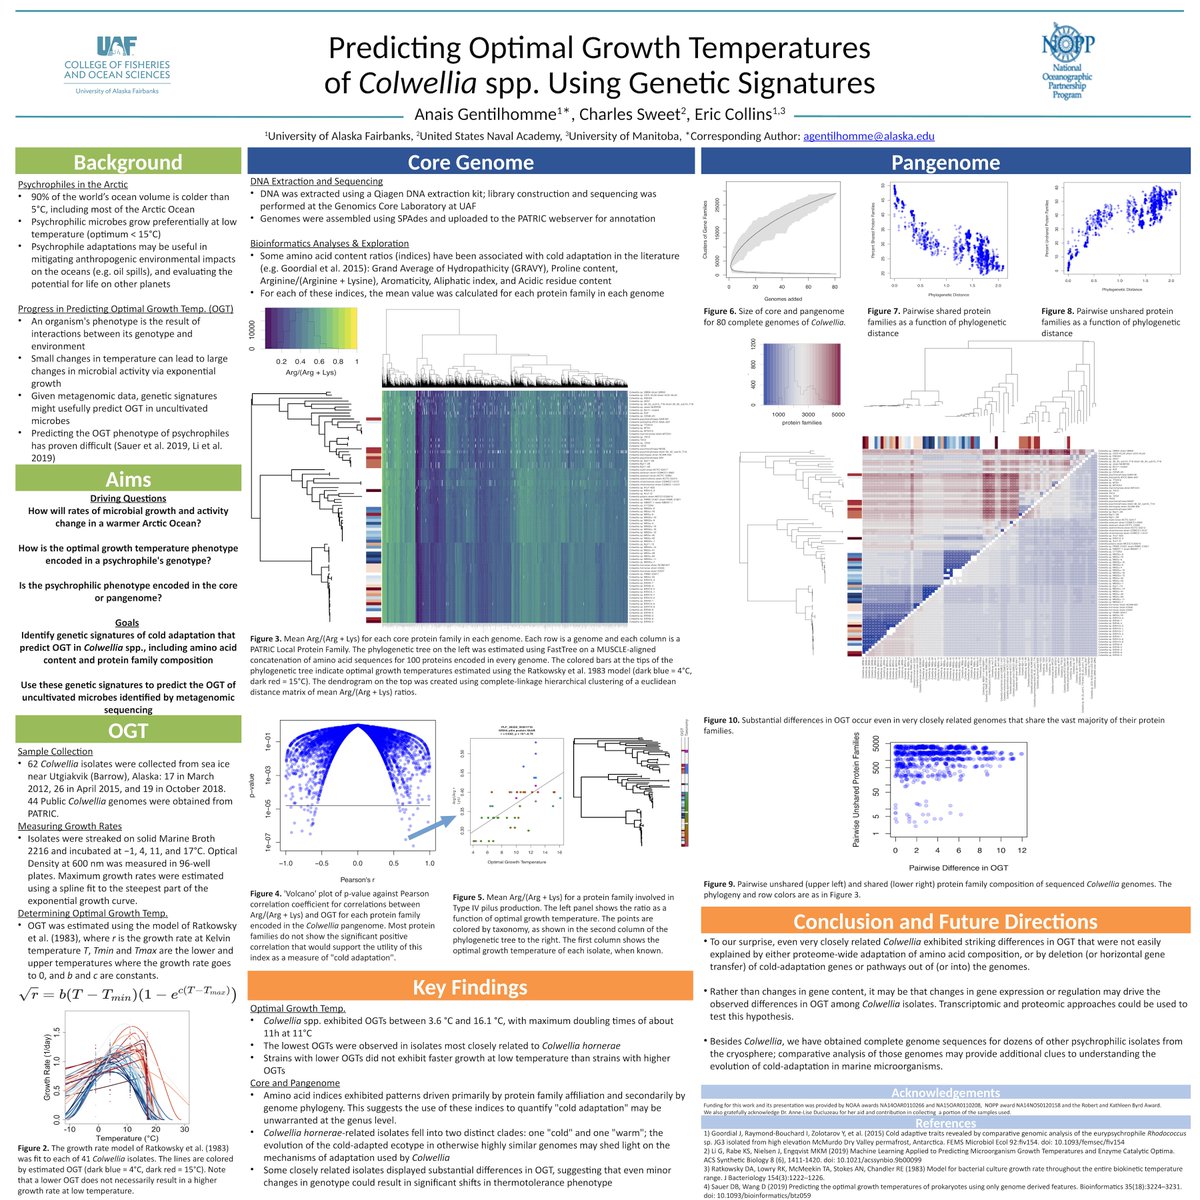 Hey #OSM20, check out MS student Anais Gentilhomme's poster today (MM34B-0334) about Predicting Optimal Growth Temperatures of Colwellia spp. Using Genetic Signatures!